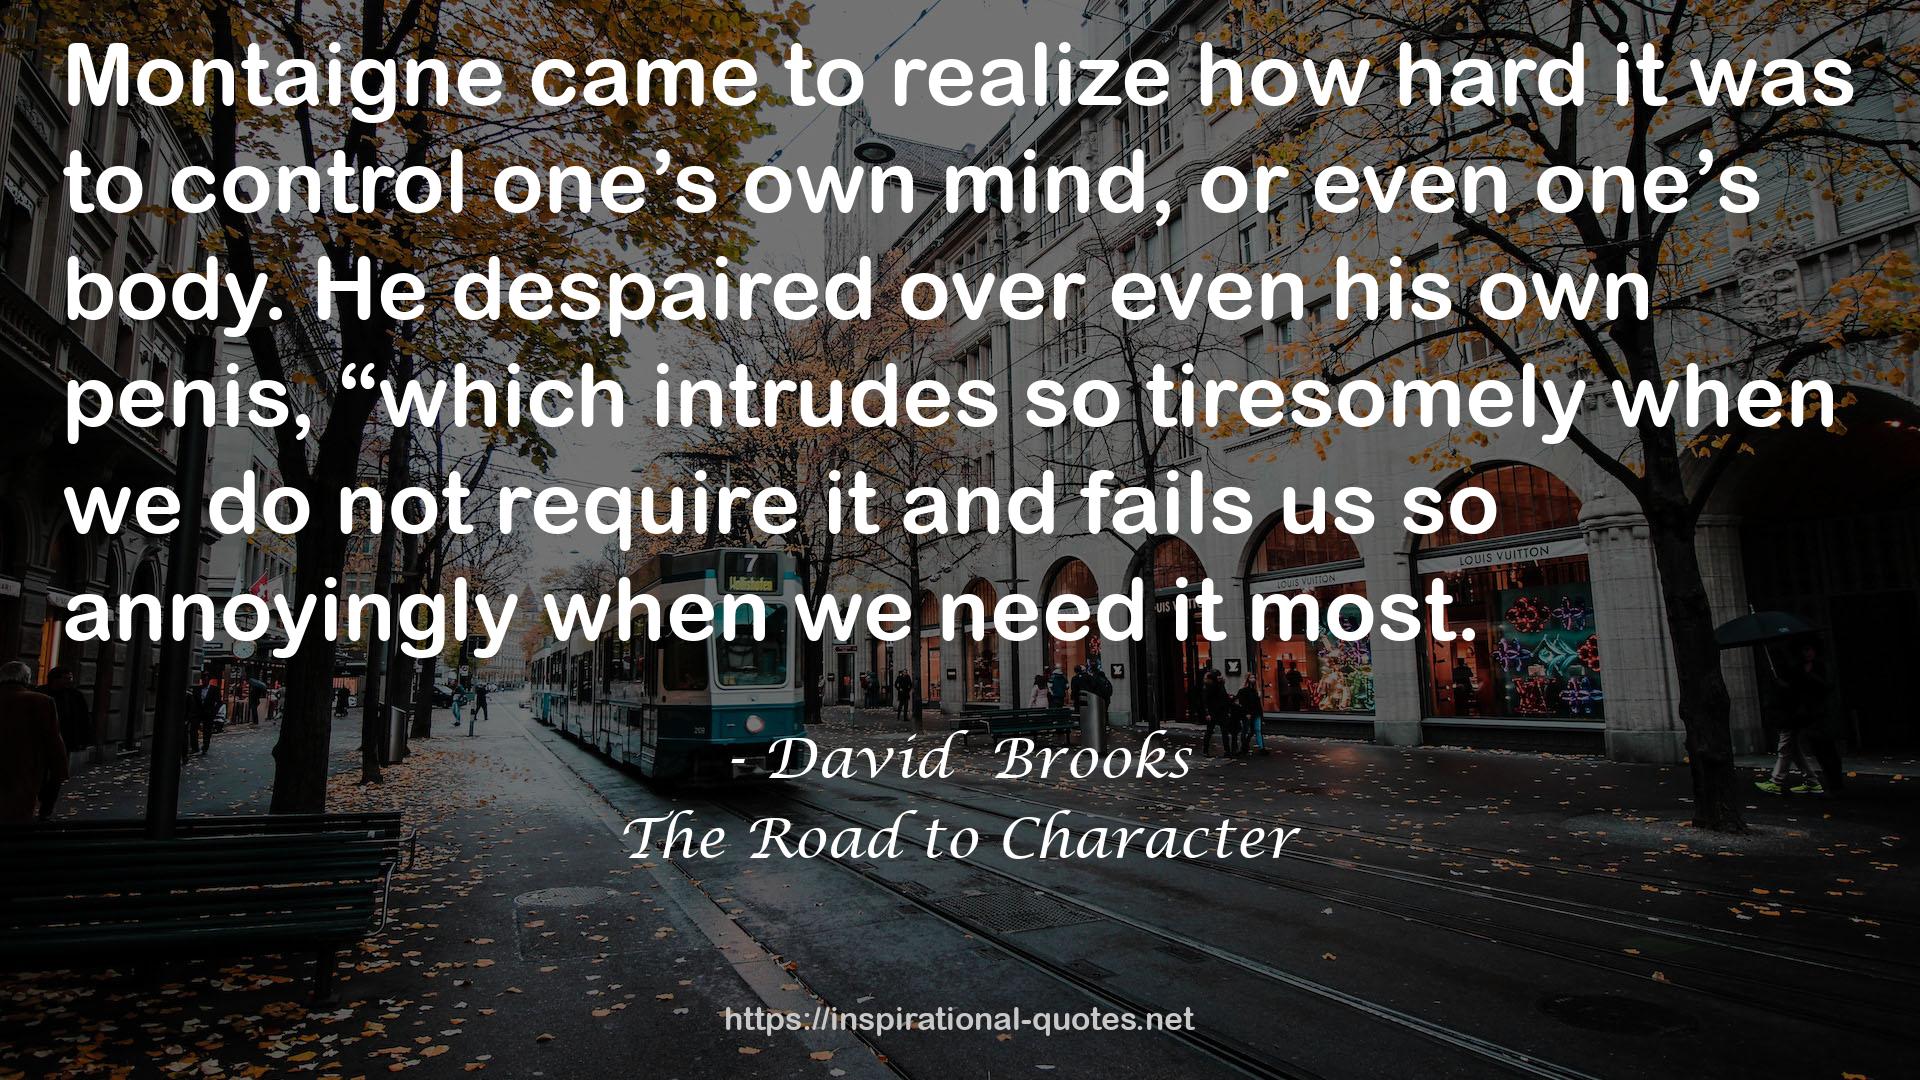 The Road to Character QUOTES